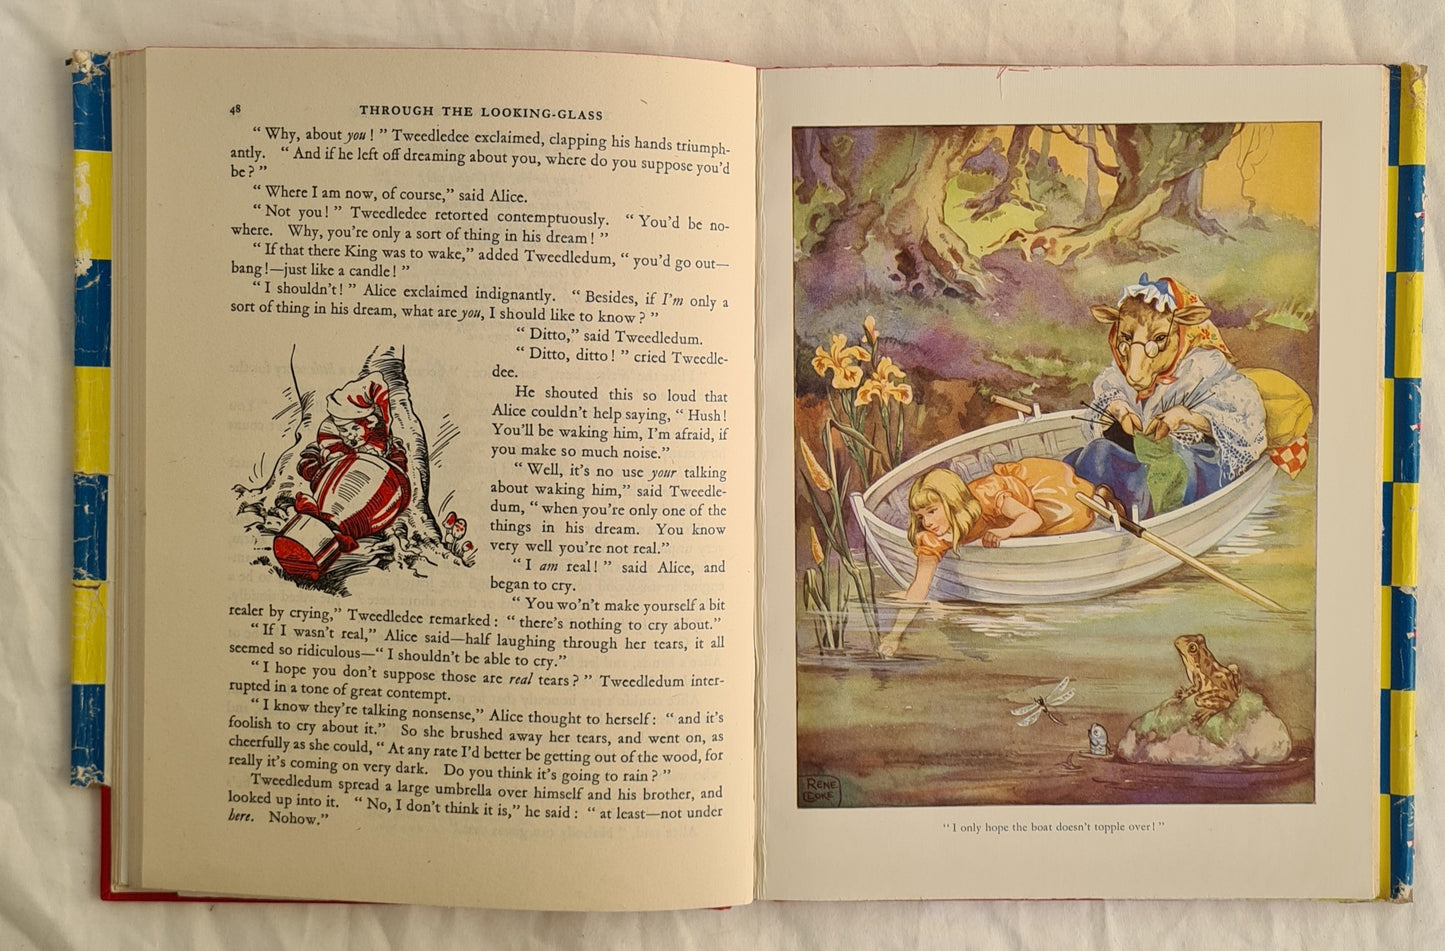 Alice Through the Looking Glass And What Alice Found There by Lewis Carroll